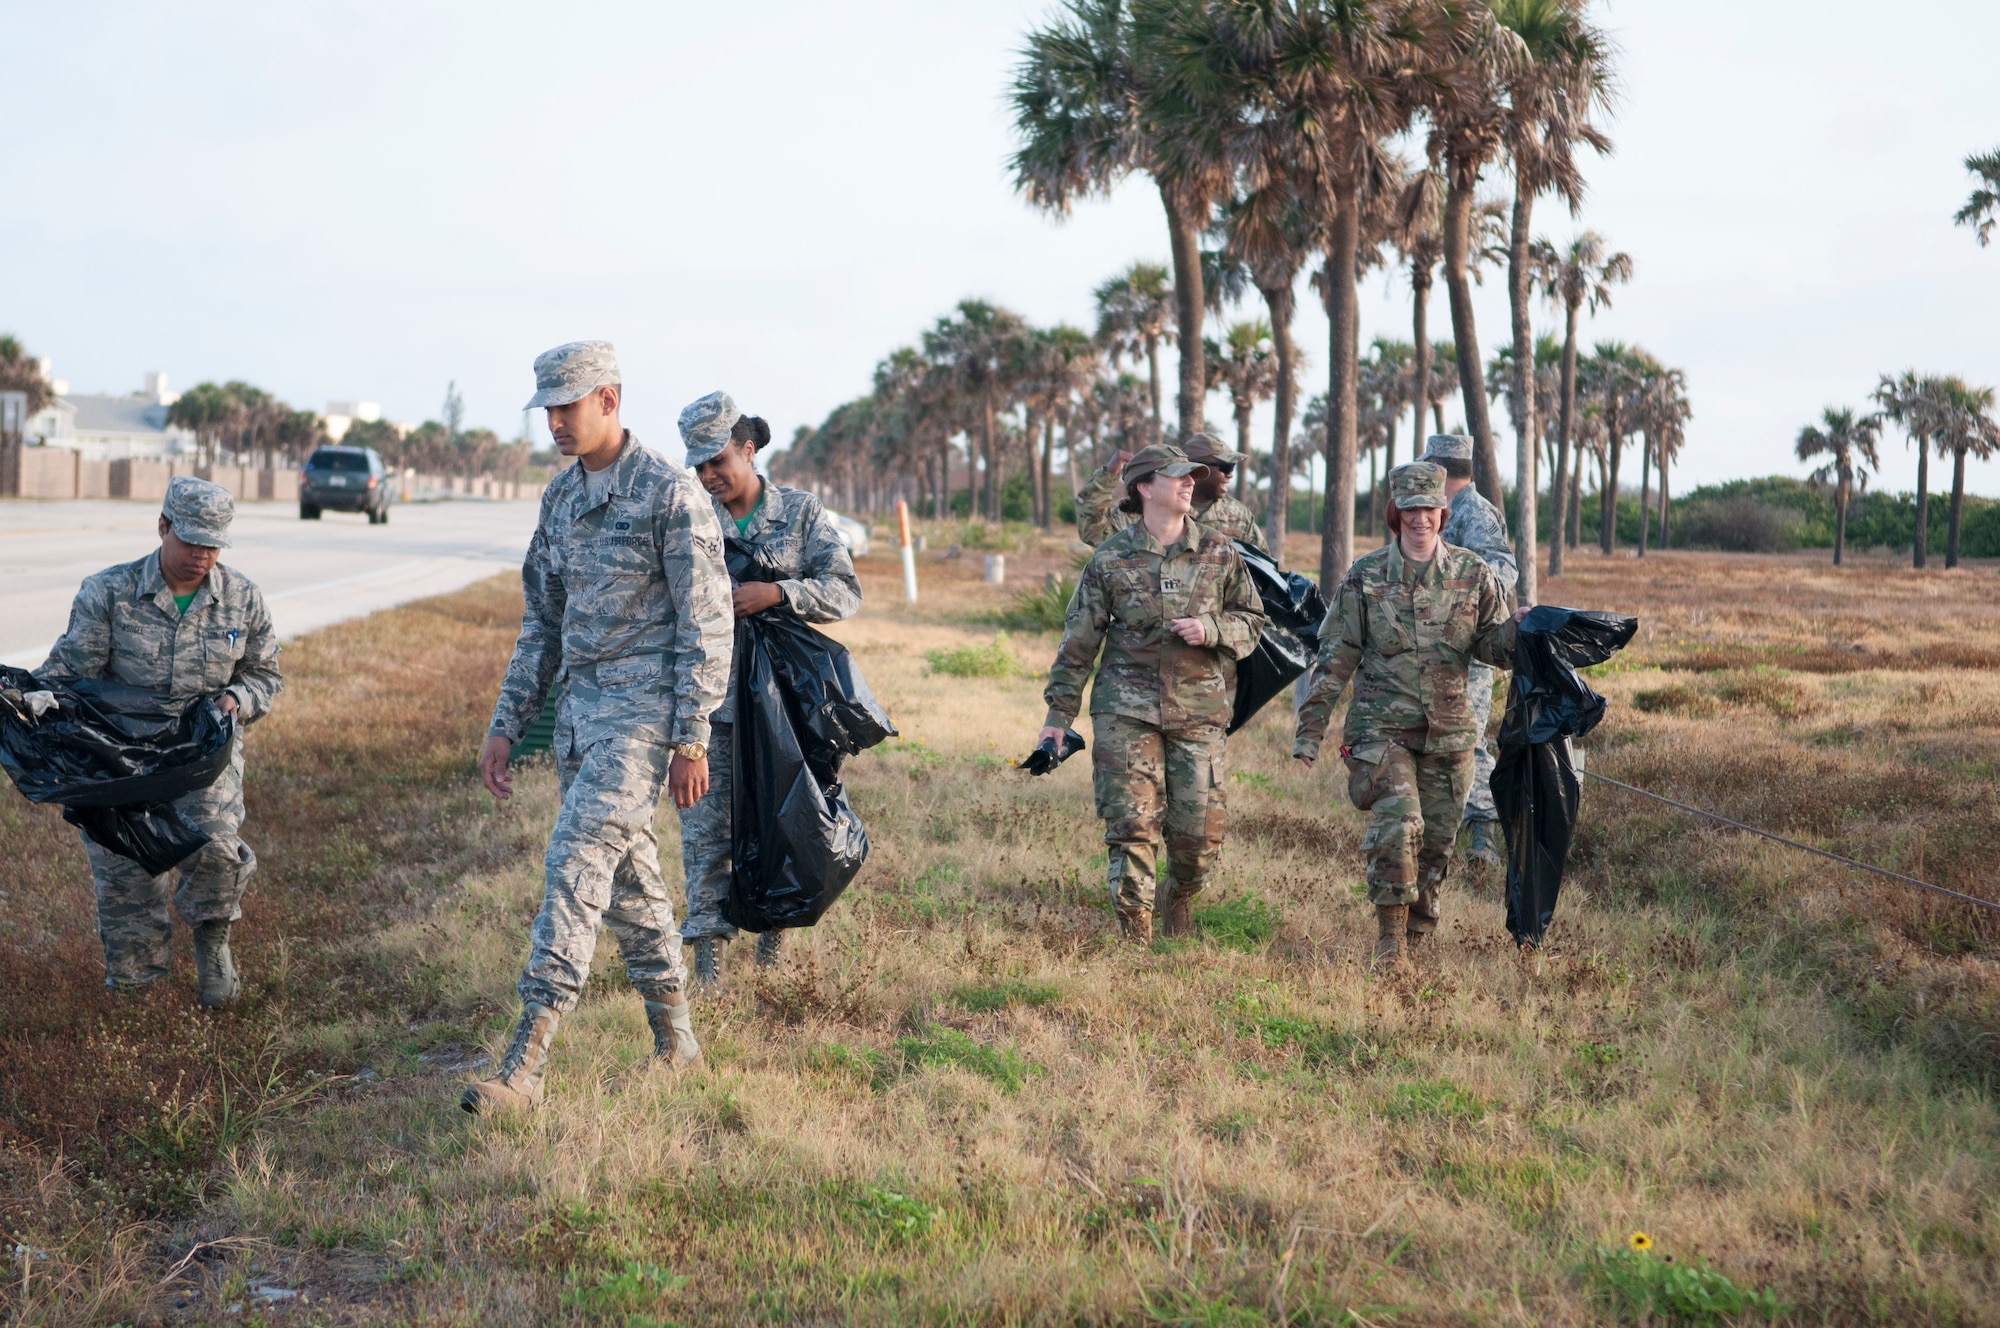 Reserve Citizen Airmen from the 920th Mission Support Group Staff recently staked their claim to a two-mile plot of land outside Patrick Air Force Base, Florida in Cocoa Beach, to became caretakers through the Adopt-a-Highway program. After their sign was erected during the April 2018 drill training weekend, seven MSG Staff personnel went to work clearing trash and debris along their beachside plot. Their plan is to head out every three months to tidy up, as a team-building event and morale builder. (U.S. Air Force photo Staff Sgt. Jared Trimarchi)